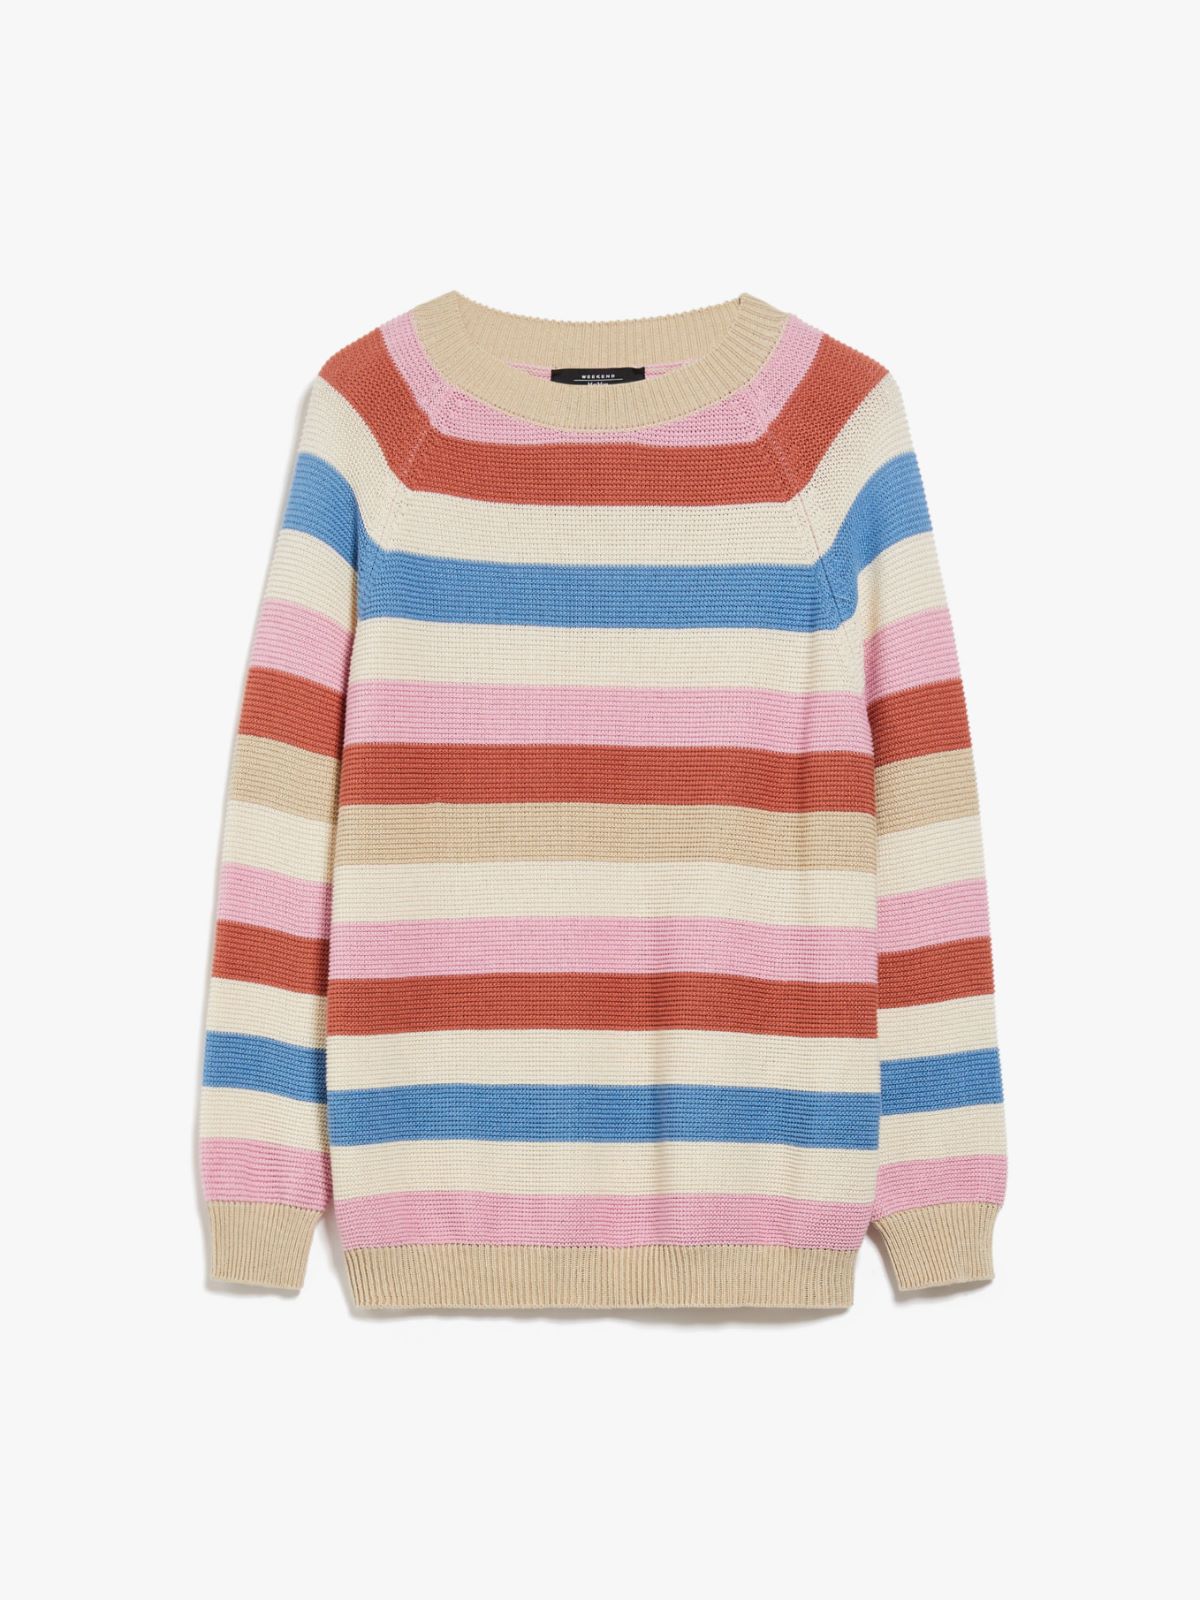 Relaxed-fit cotton sweater - MULTICOLOUR - Weekend Max Mara - 6